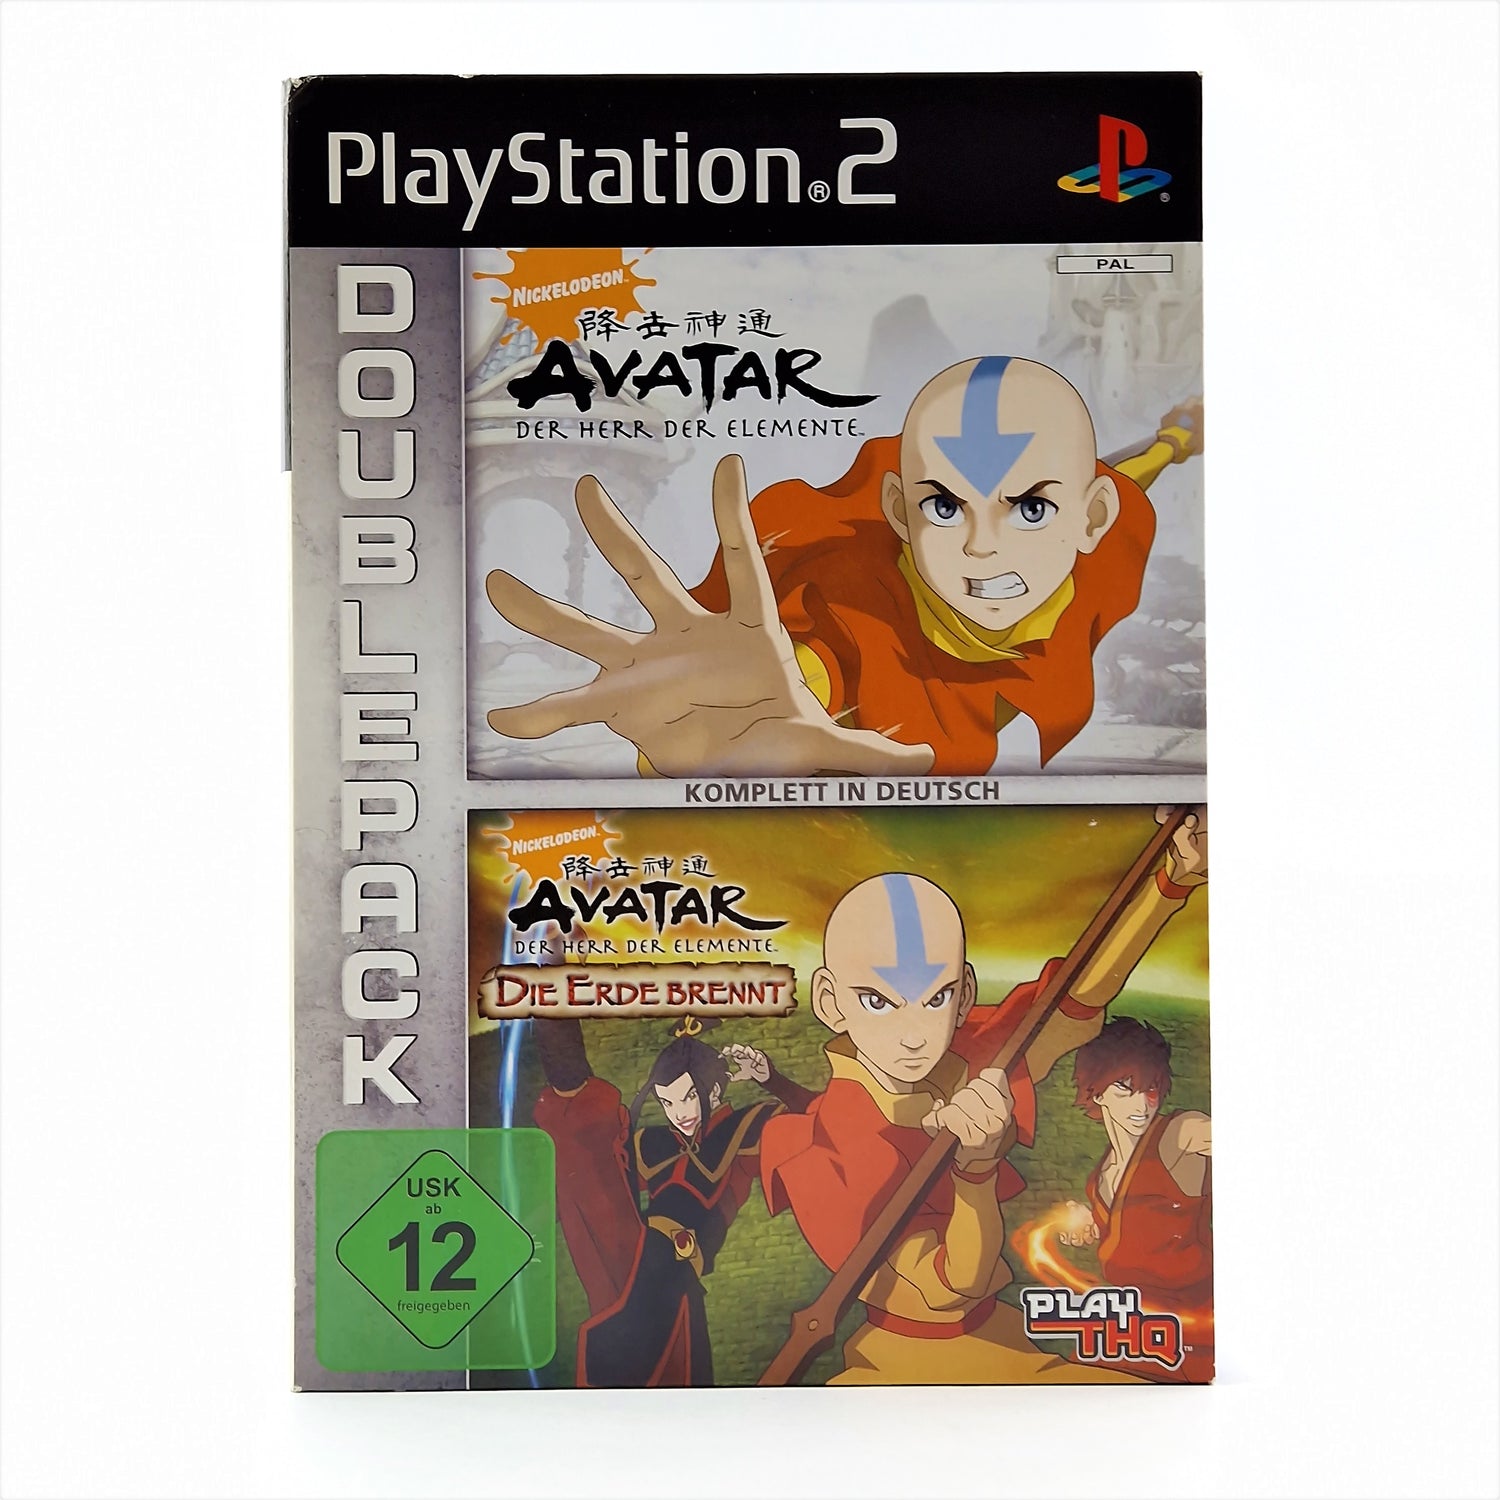 Playstation 2 game: Avatar double pack - original packaging instructions CD | Sony PS2